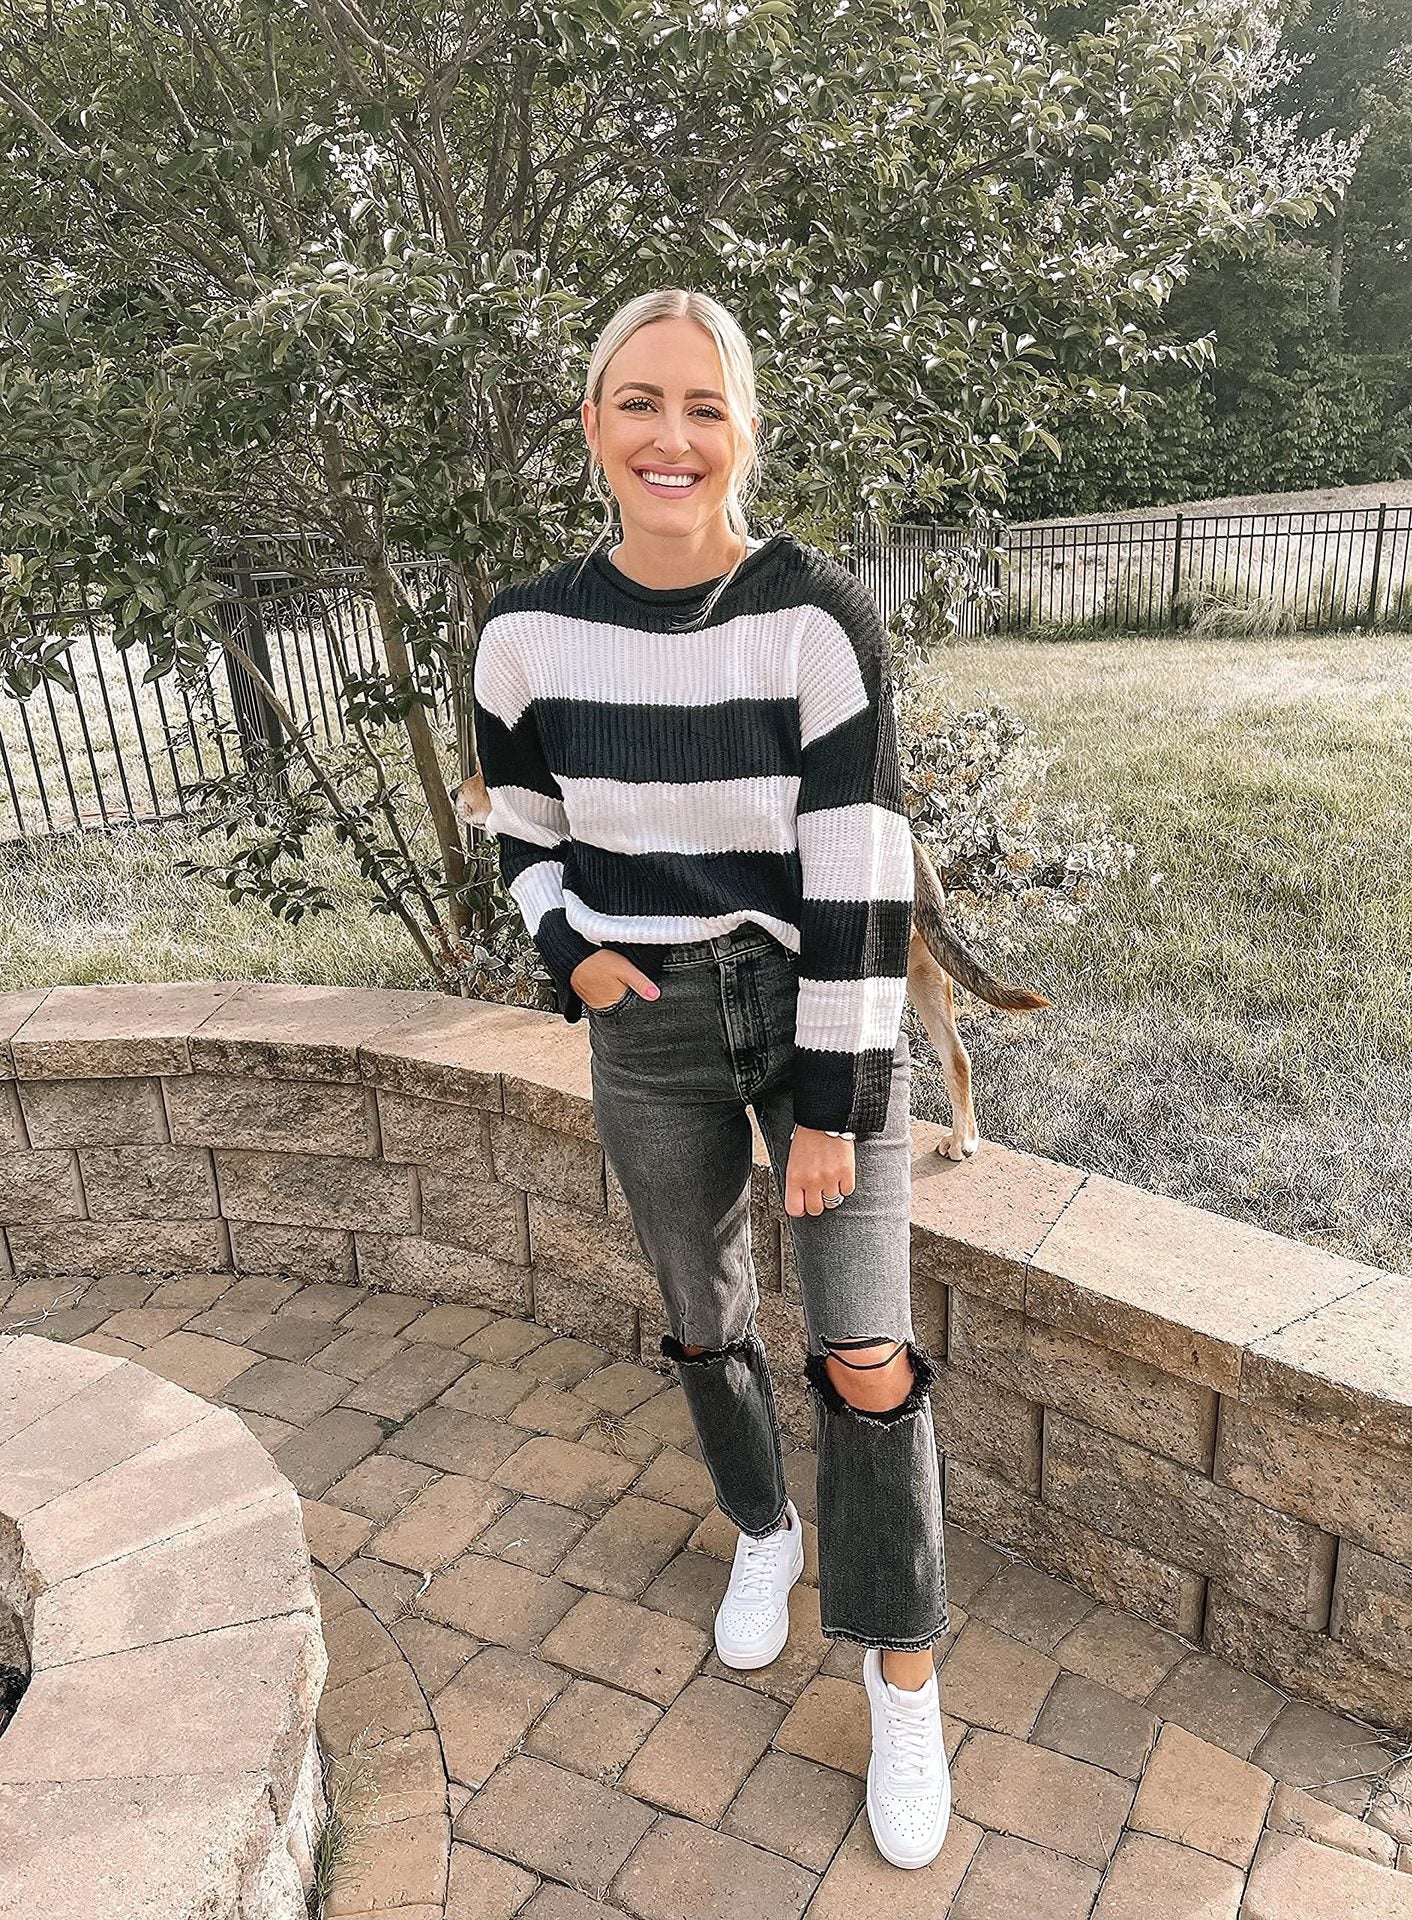 All About The Stripes Cropped Sweater